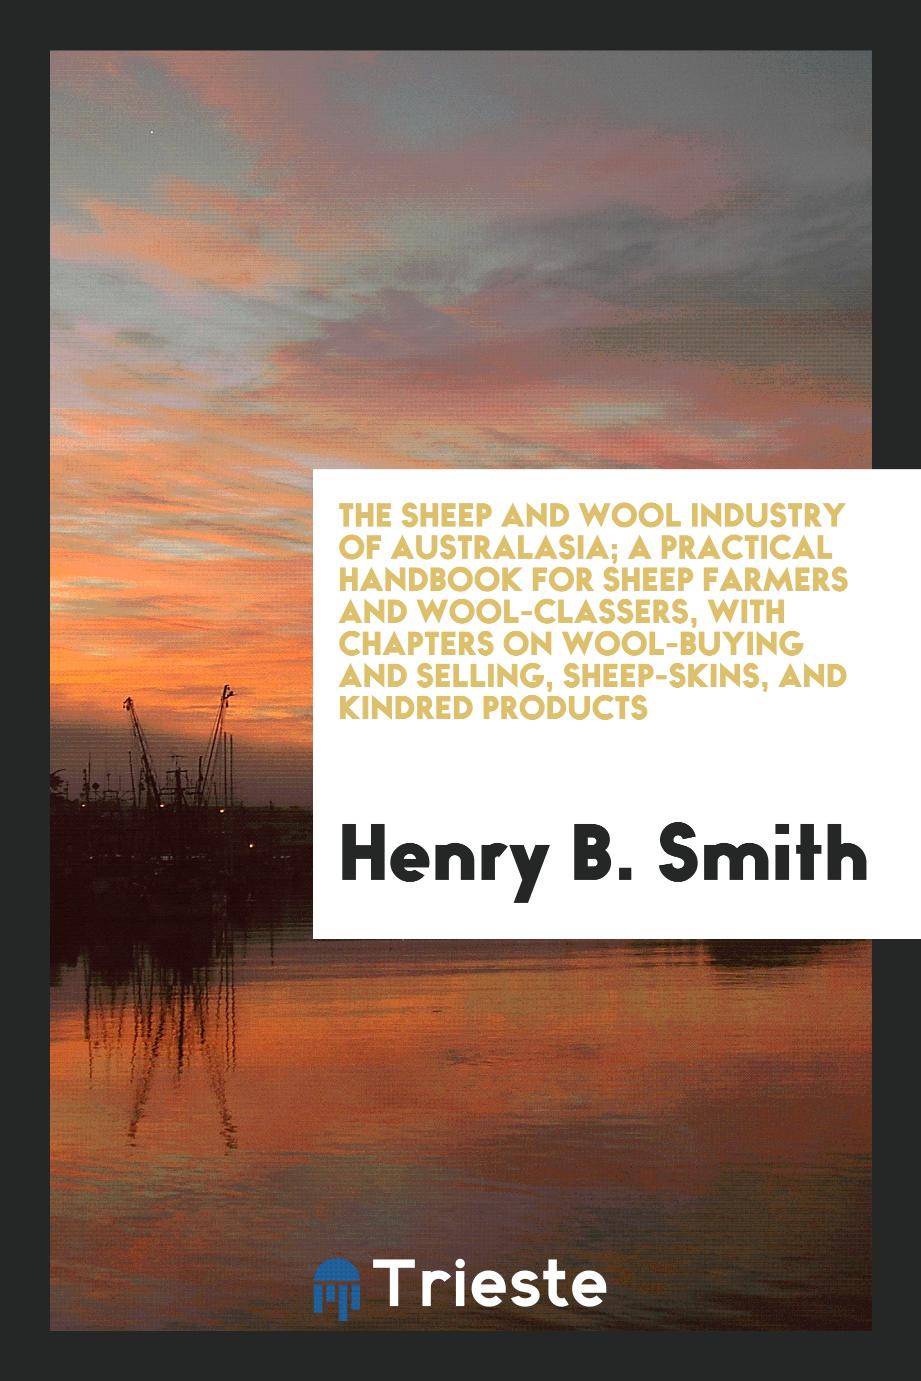 The sheep and wool industry of Australasia; a practical handbook for sheep farmers and wool-classers, with chapters on wool-buying and selling, sheep-skins, and kindred products